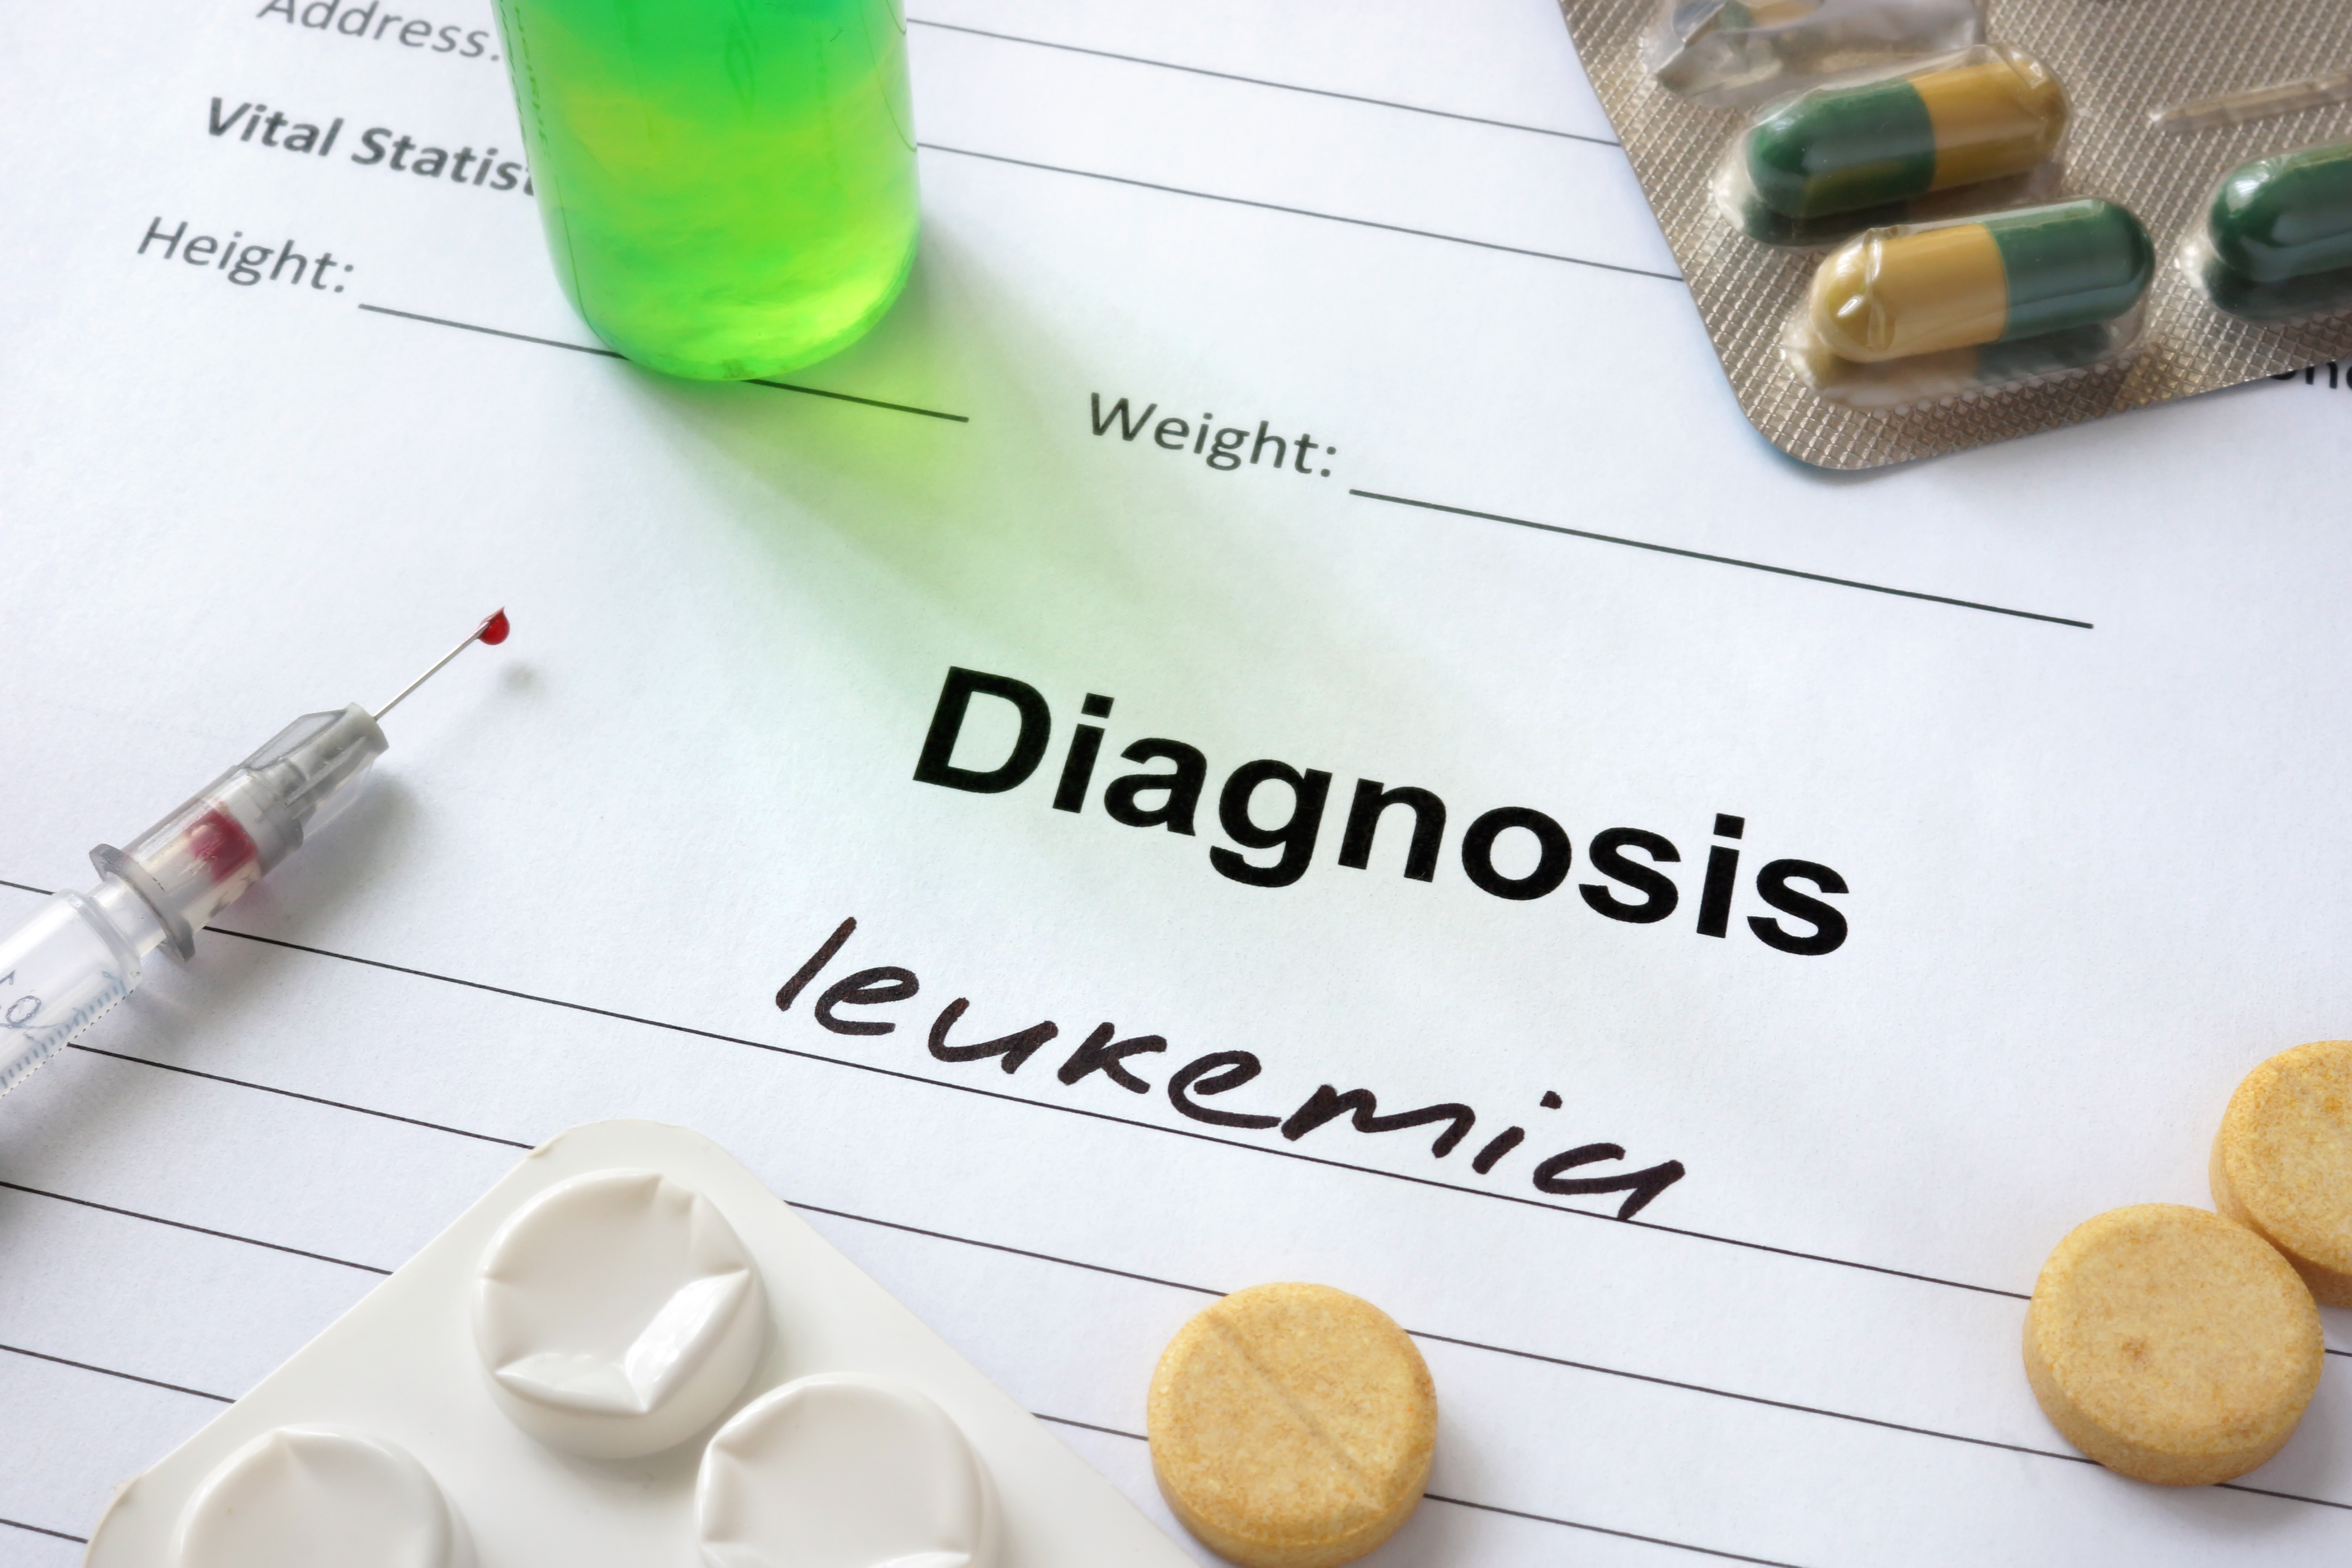 Diagnosis leukemia written in the diagnostic form and pills.